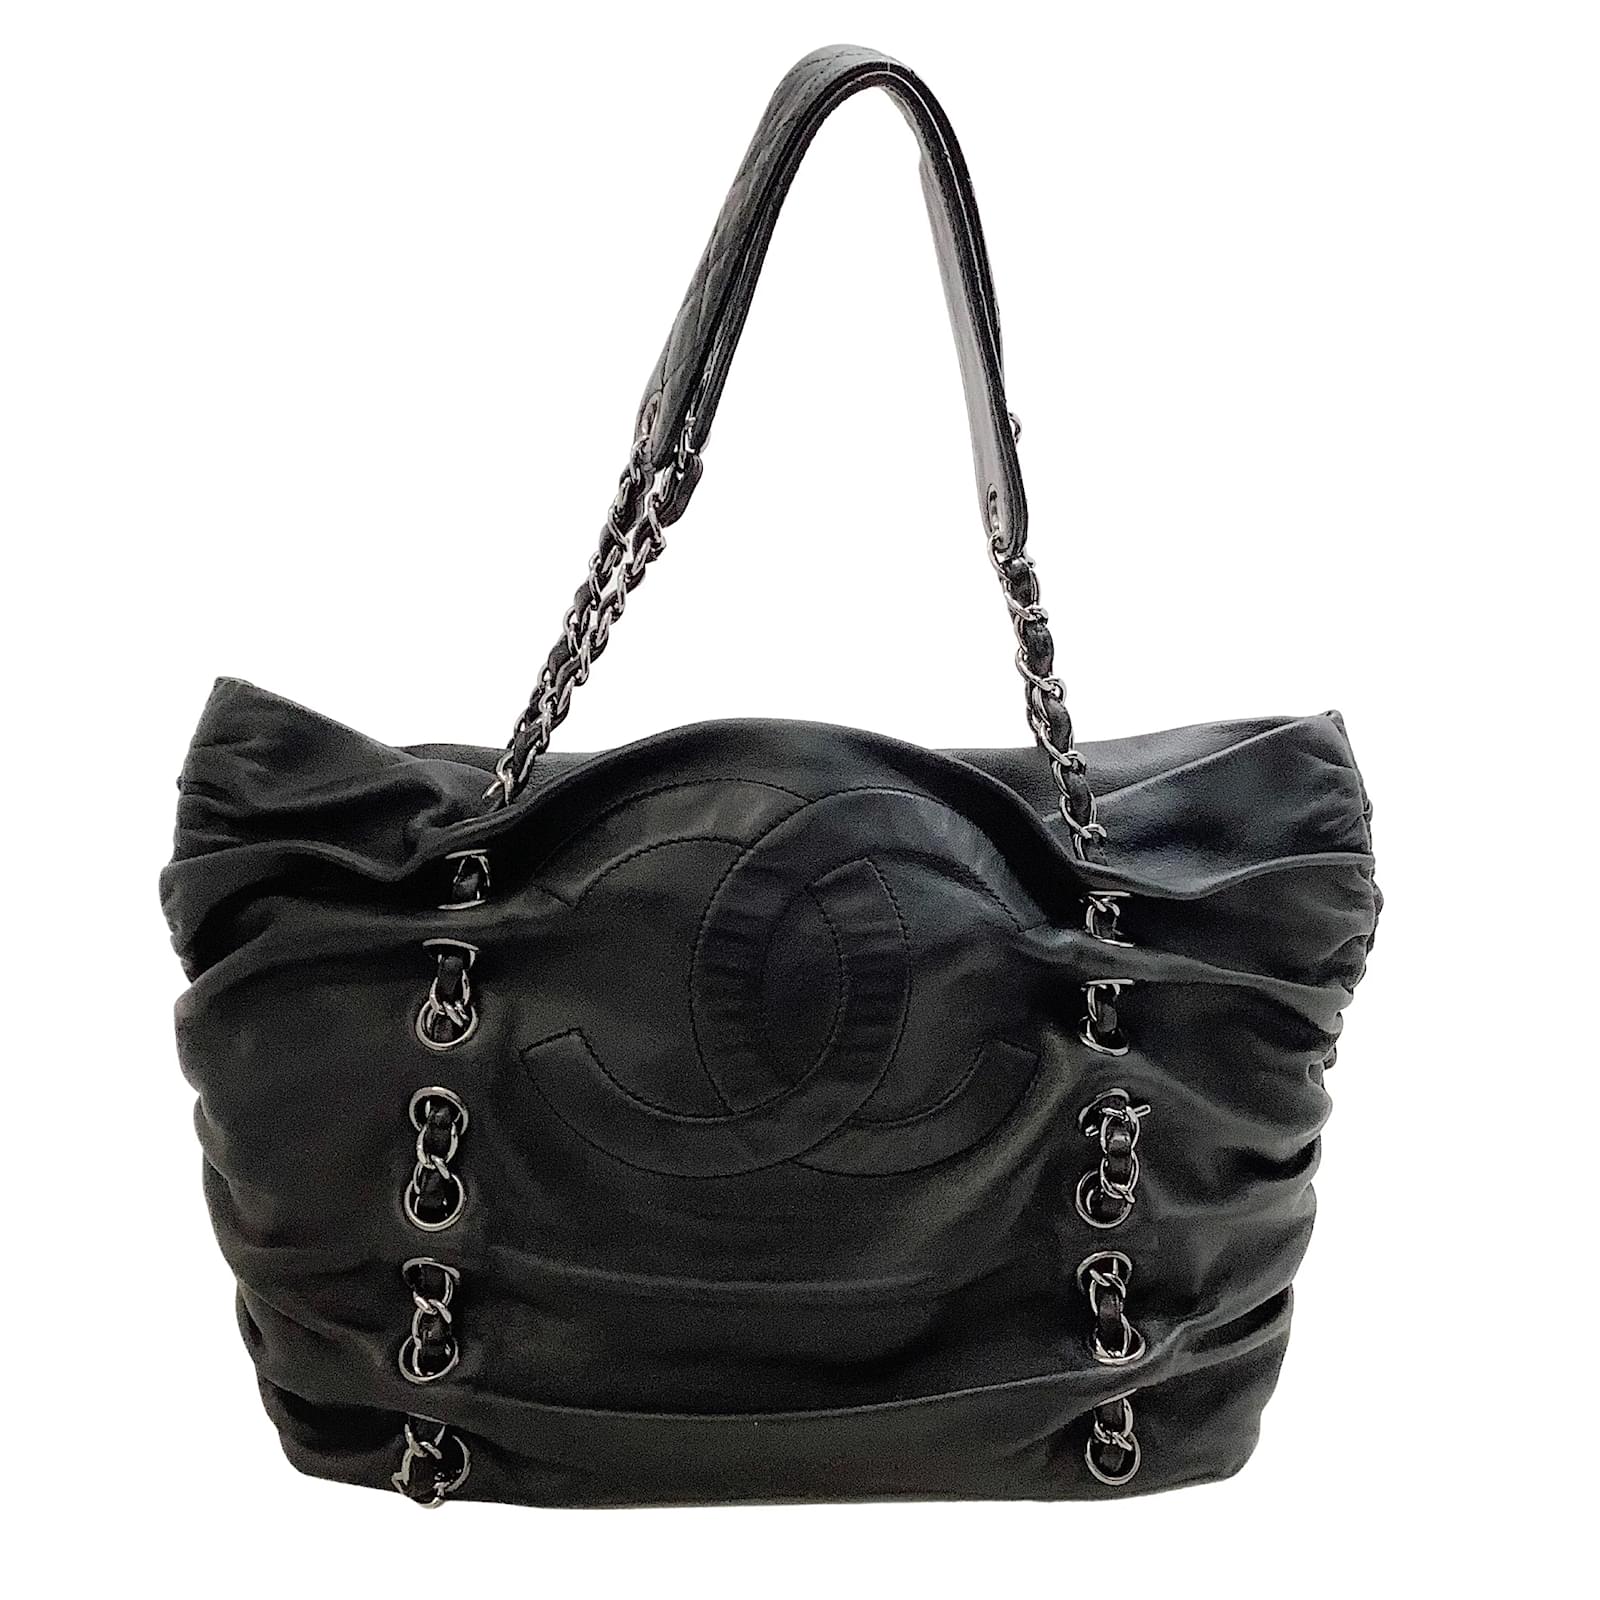 Chanel Black Leather Modern Chain Tote Chanel